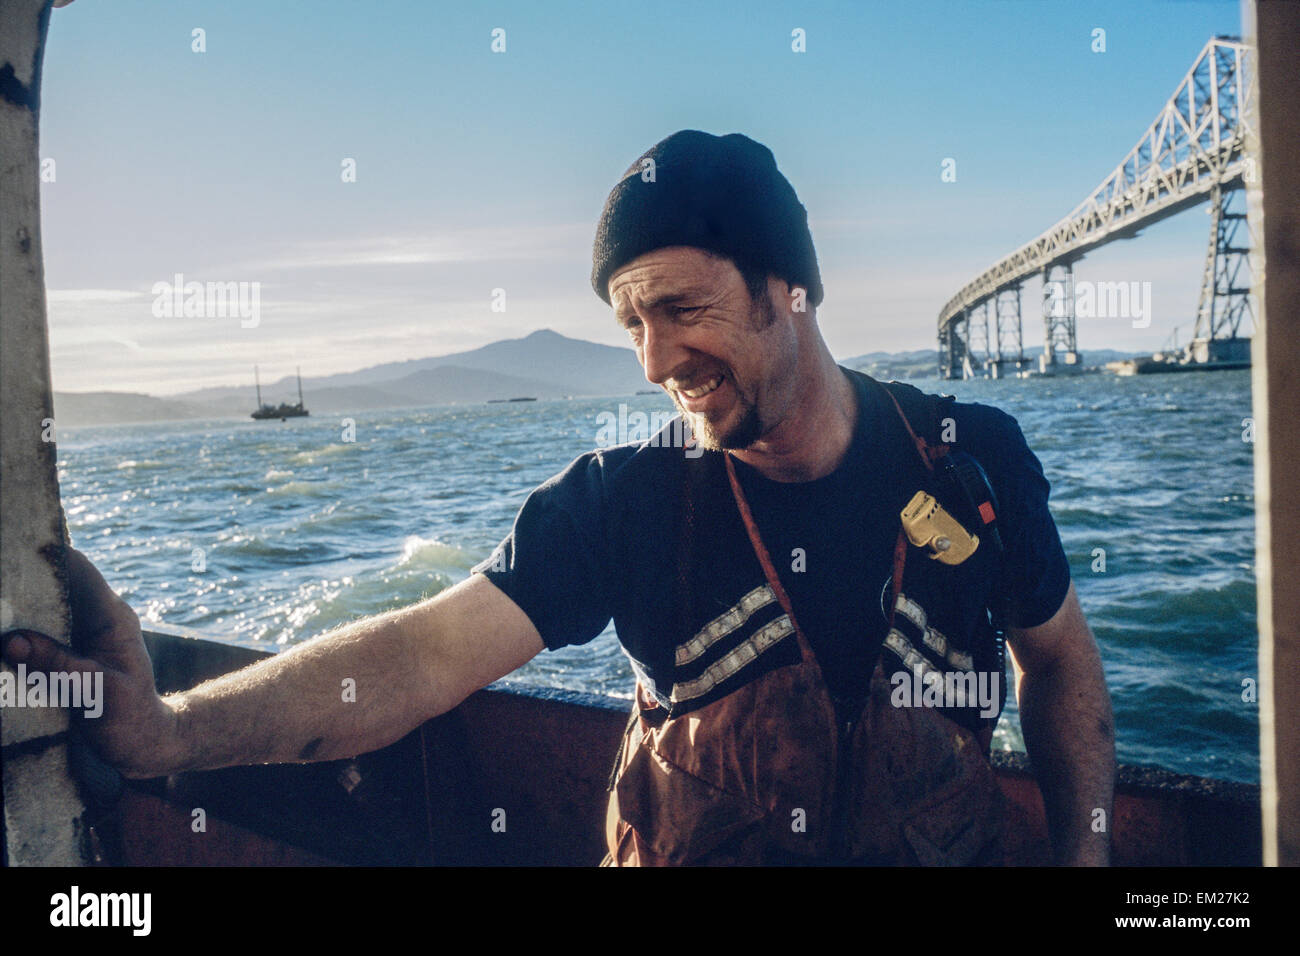 A deckhand on a tugboat. Stock Photo